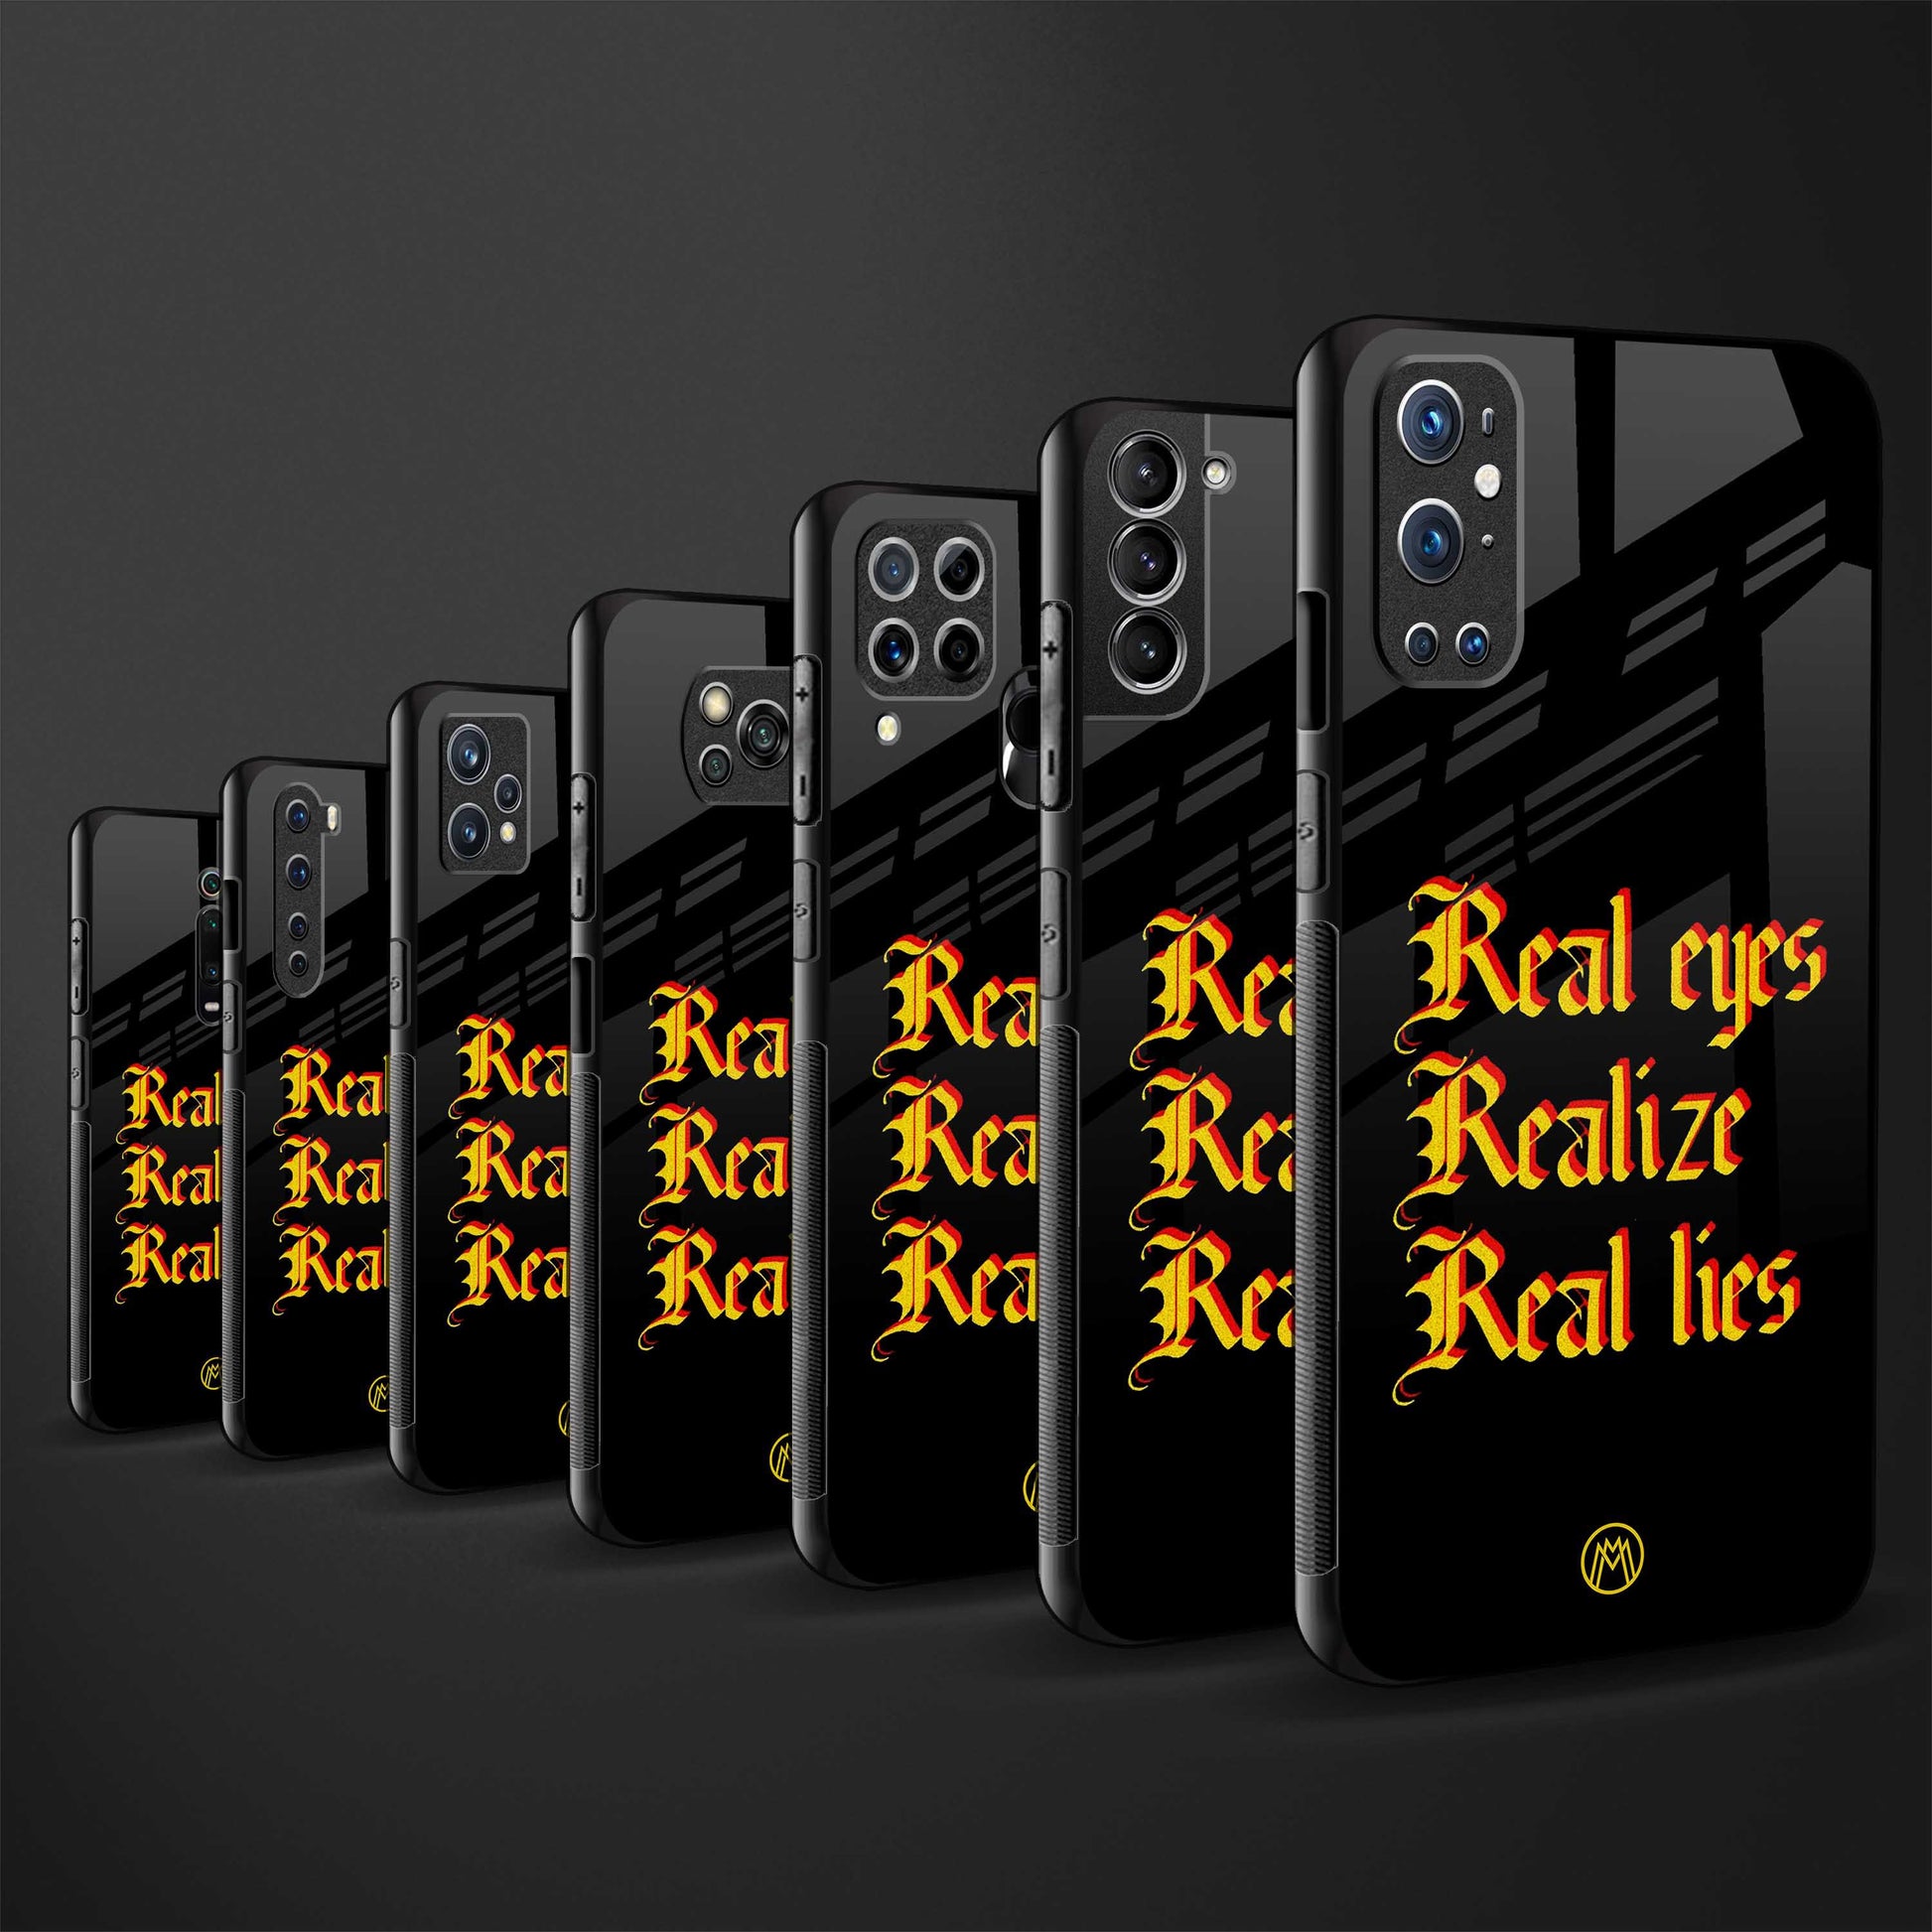 real eyes realize real lies quote glass case for samsung galaxy a7 2018 image-3